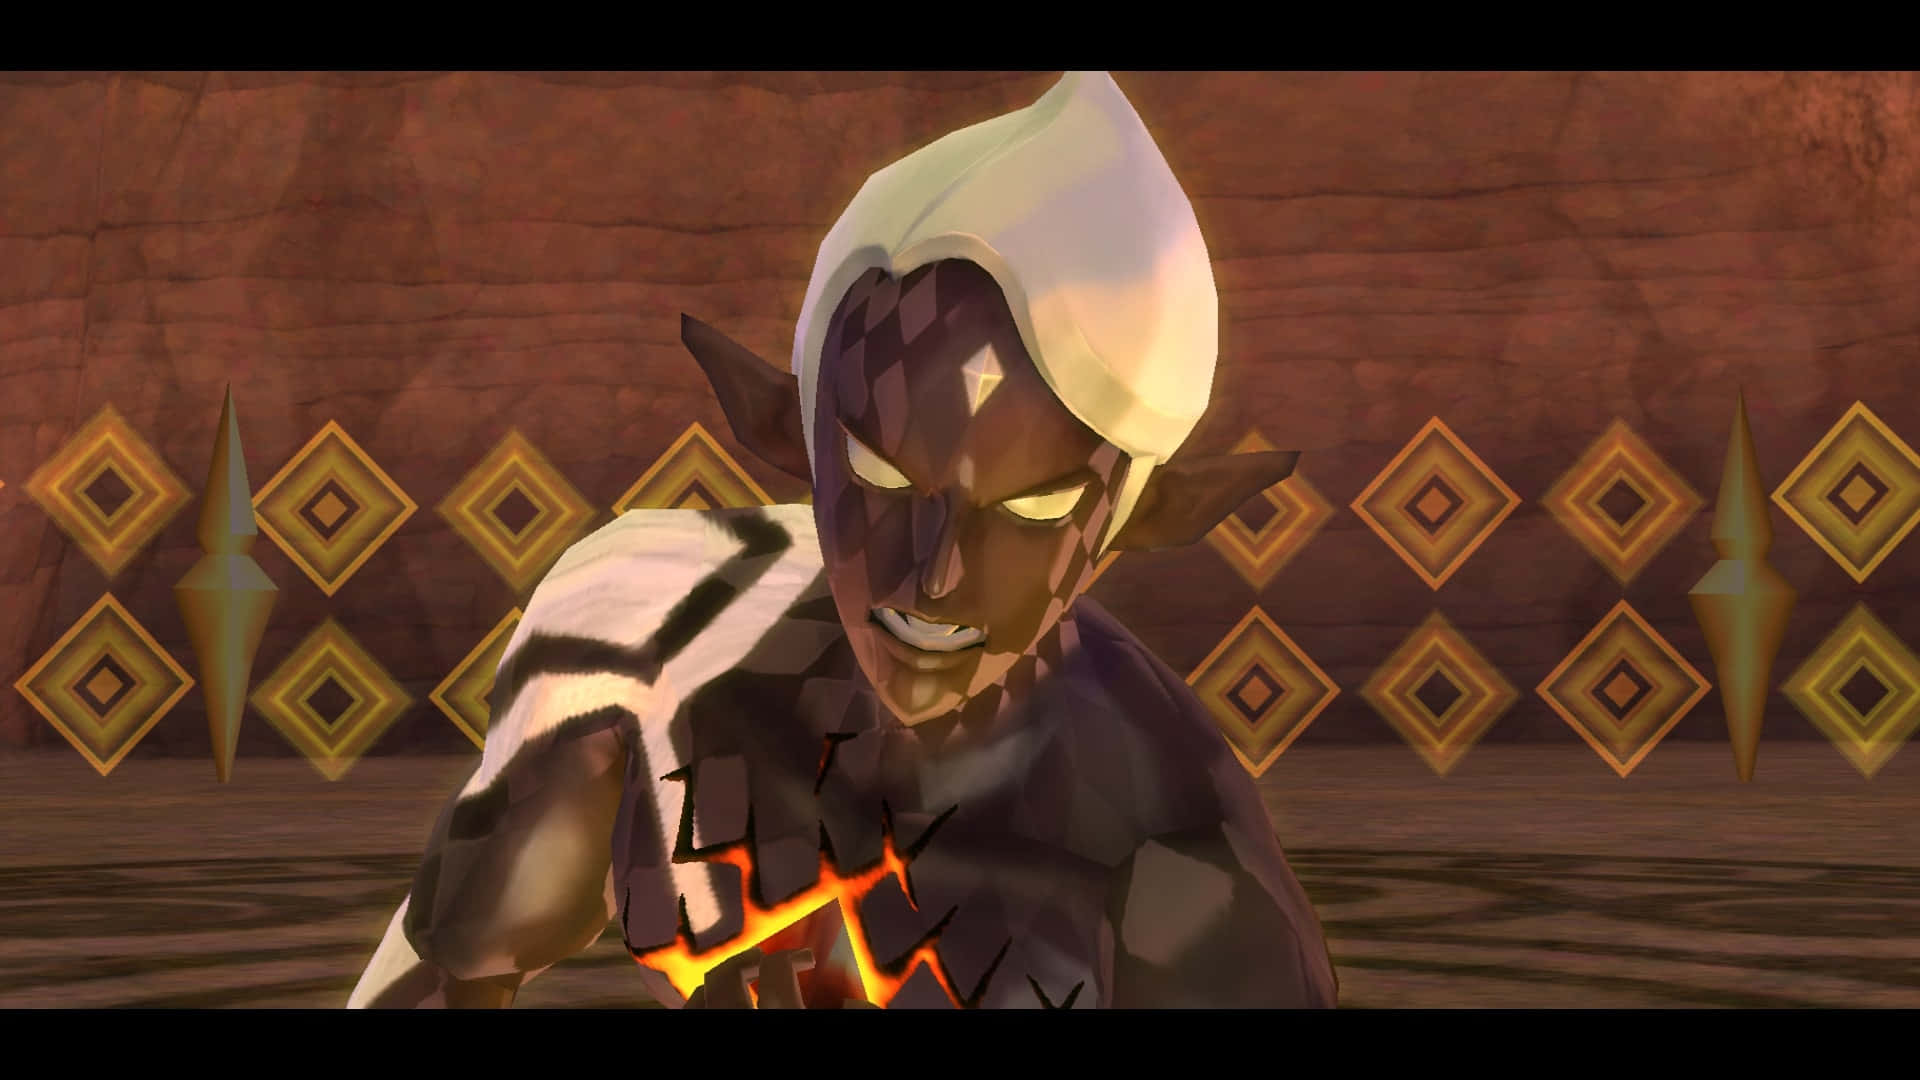 Ghirahim, the cunning antagonist, in The Legend of Zelda game series. Wallpaper